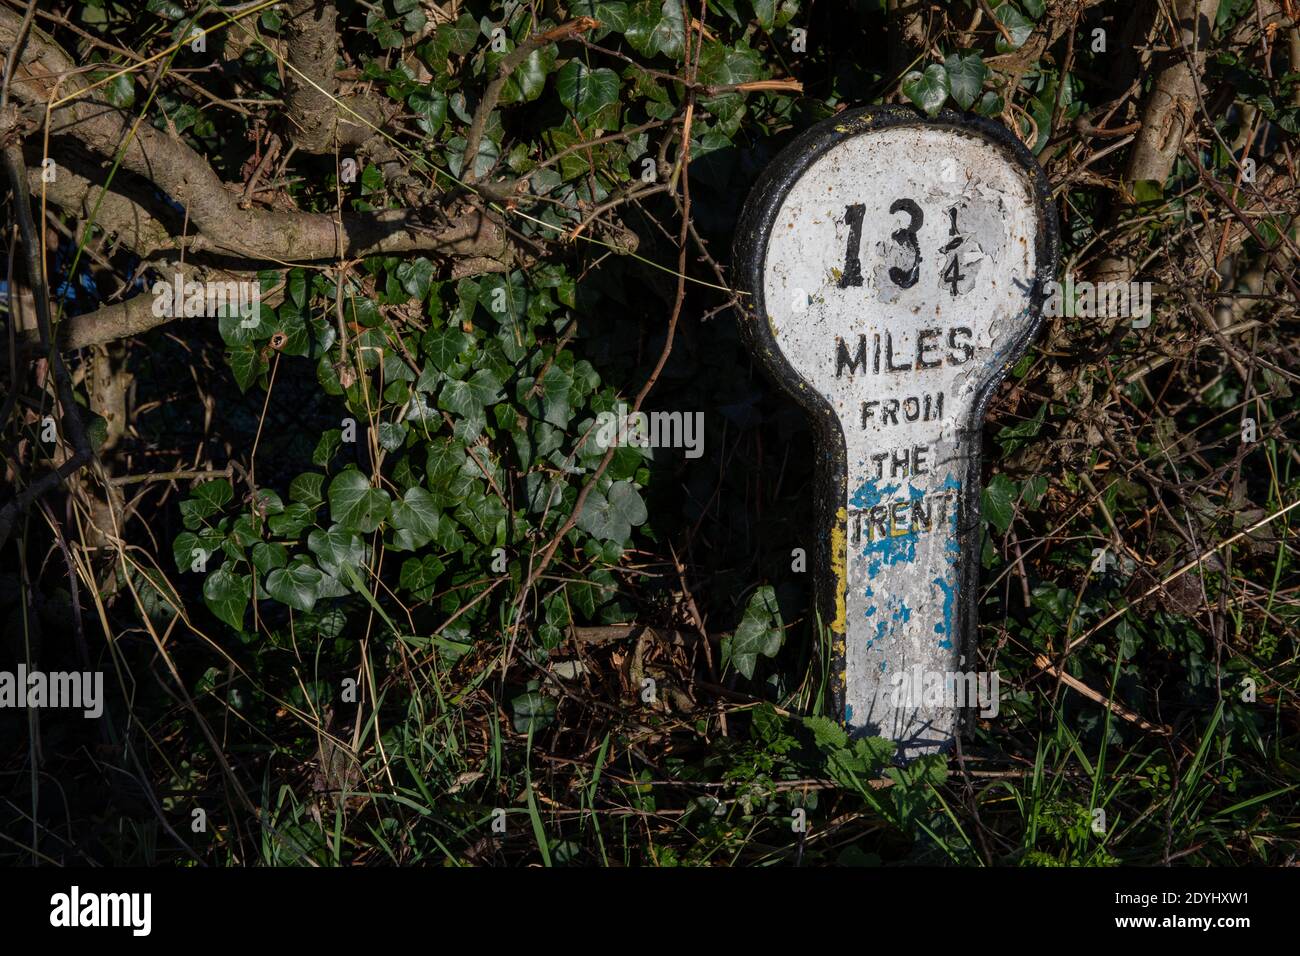 Mile post (13 1/4 miles from the Trent) along Grantham Canal near Hickling, Nottinghamshire, England, United Kingdom Stock Photo